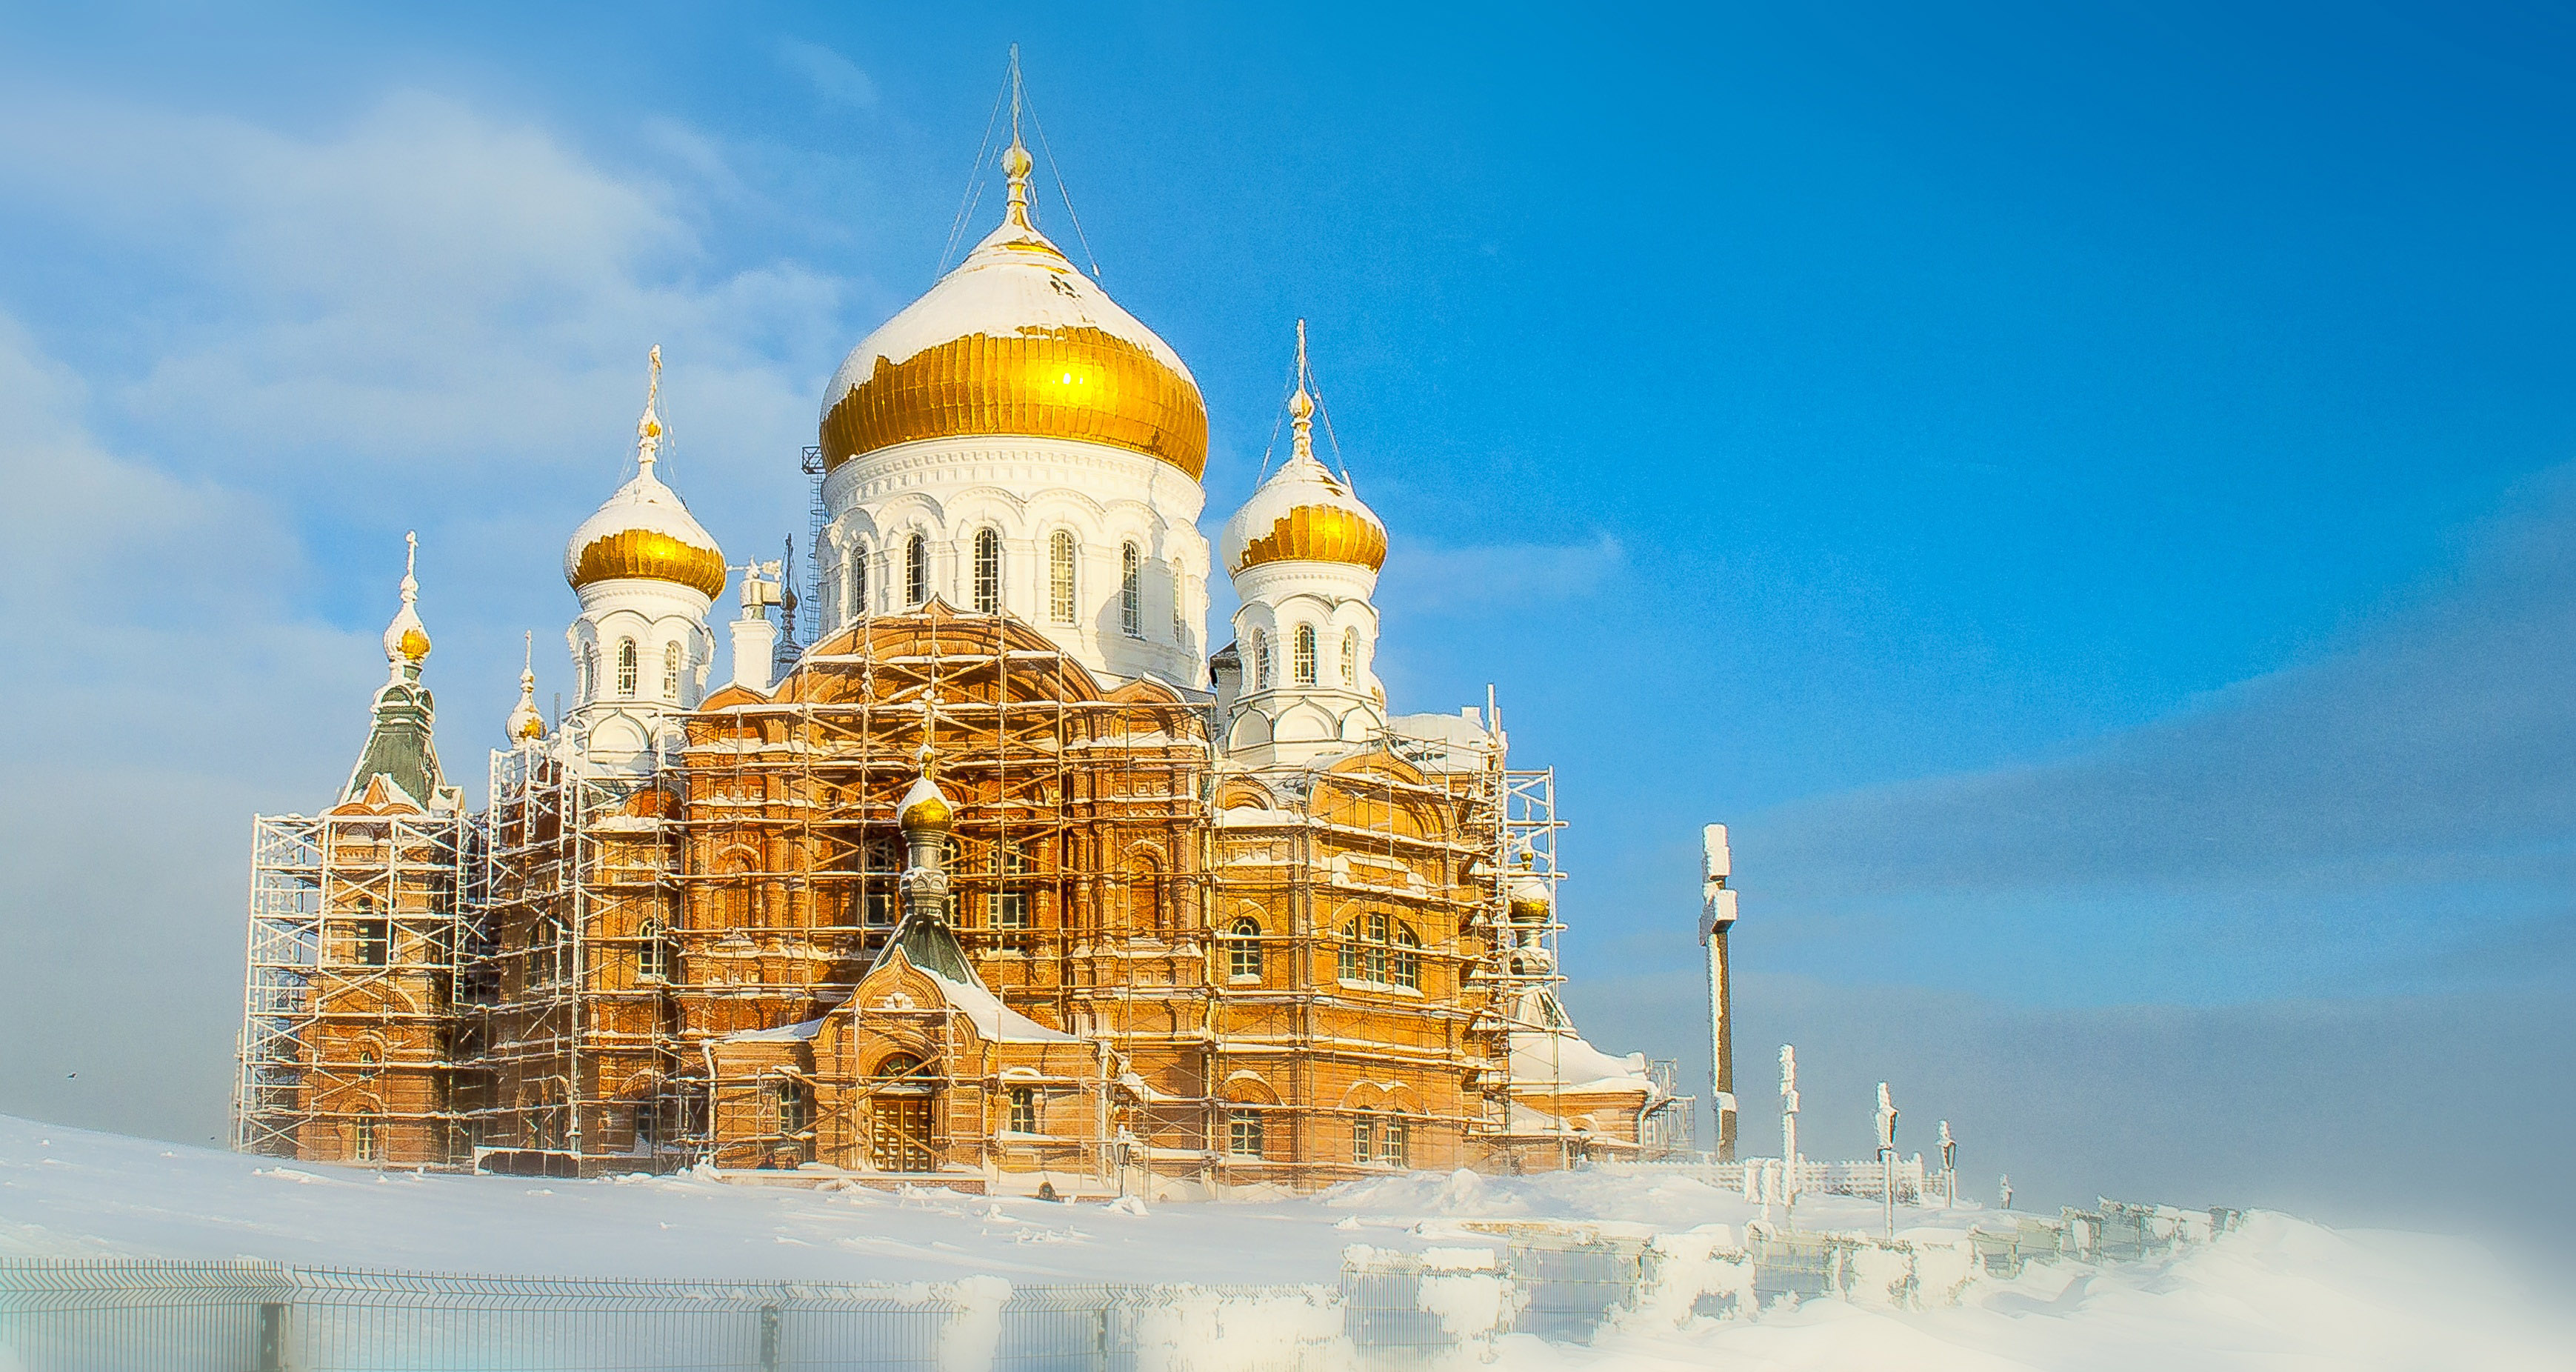 Golden Spires of the Russian Orthodox Church image - Free stock photo - Public Domain photo - CC0 Images